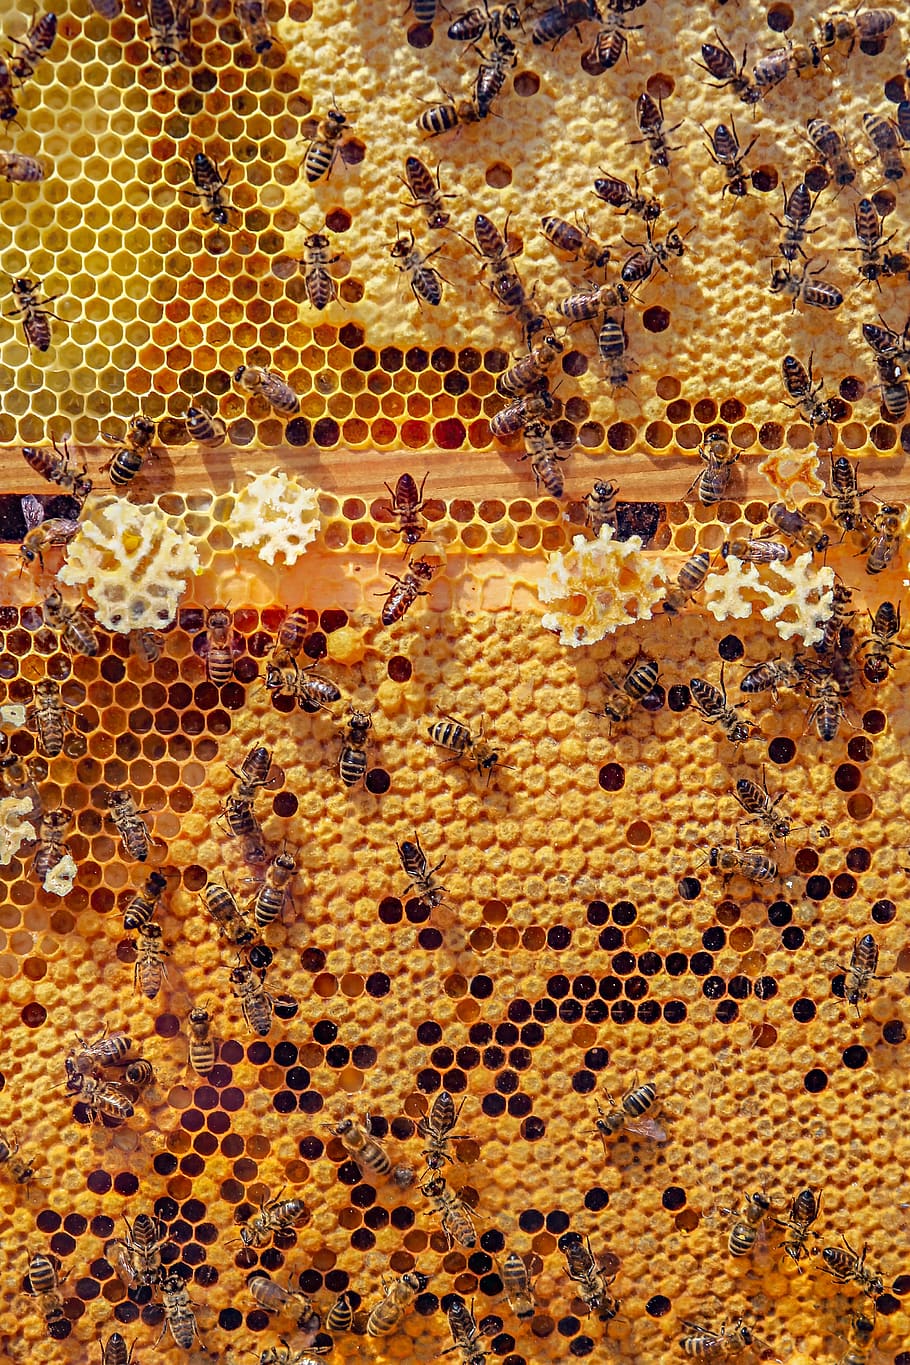 bees, nature, animals, honeycomb, honey bee, insect, close up, collect, foraging, wing